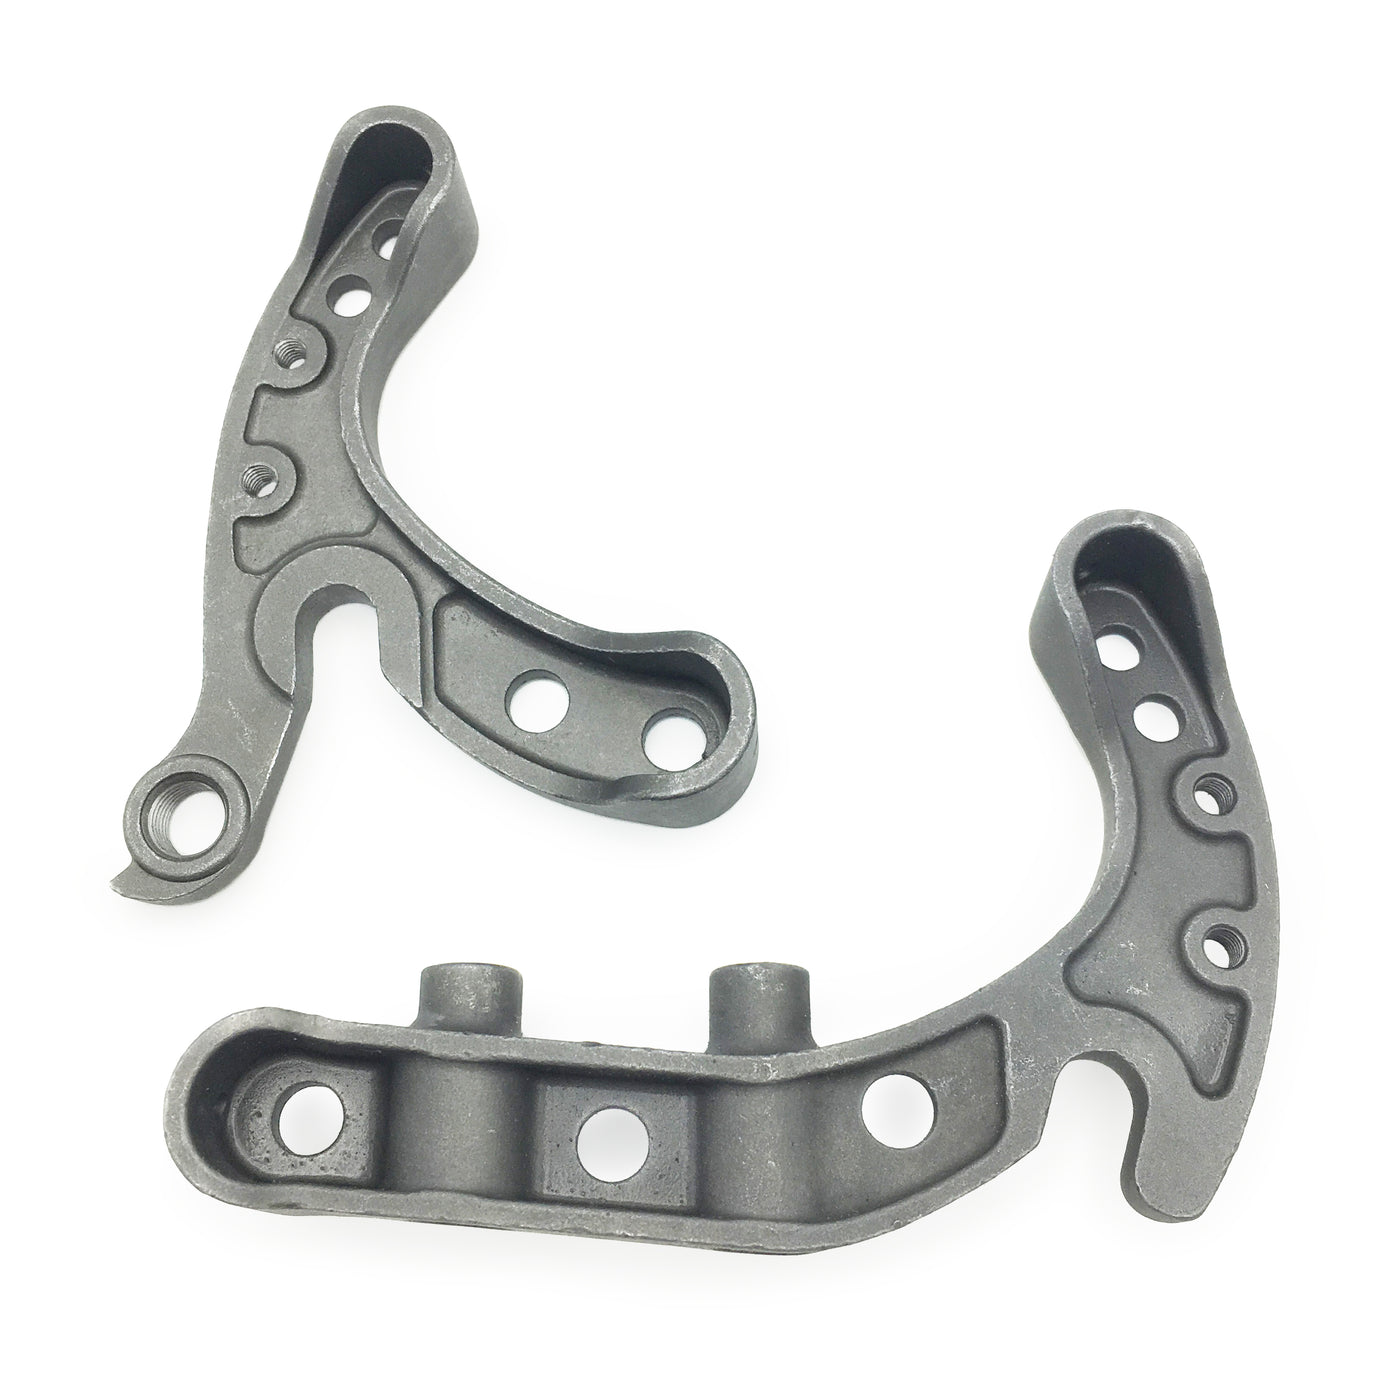 Rear dropouts for flat mount disc brakes - with eyelets